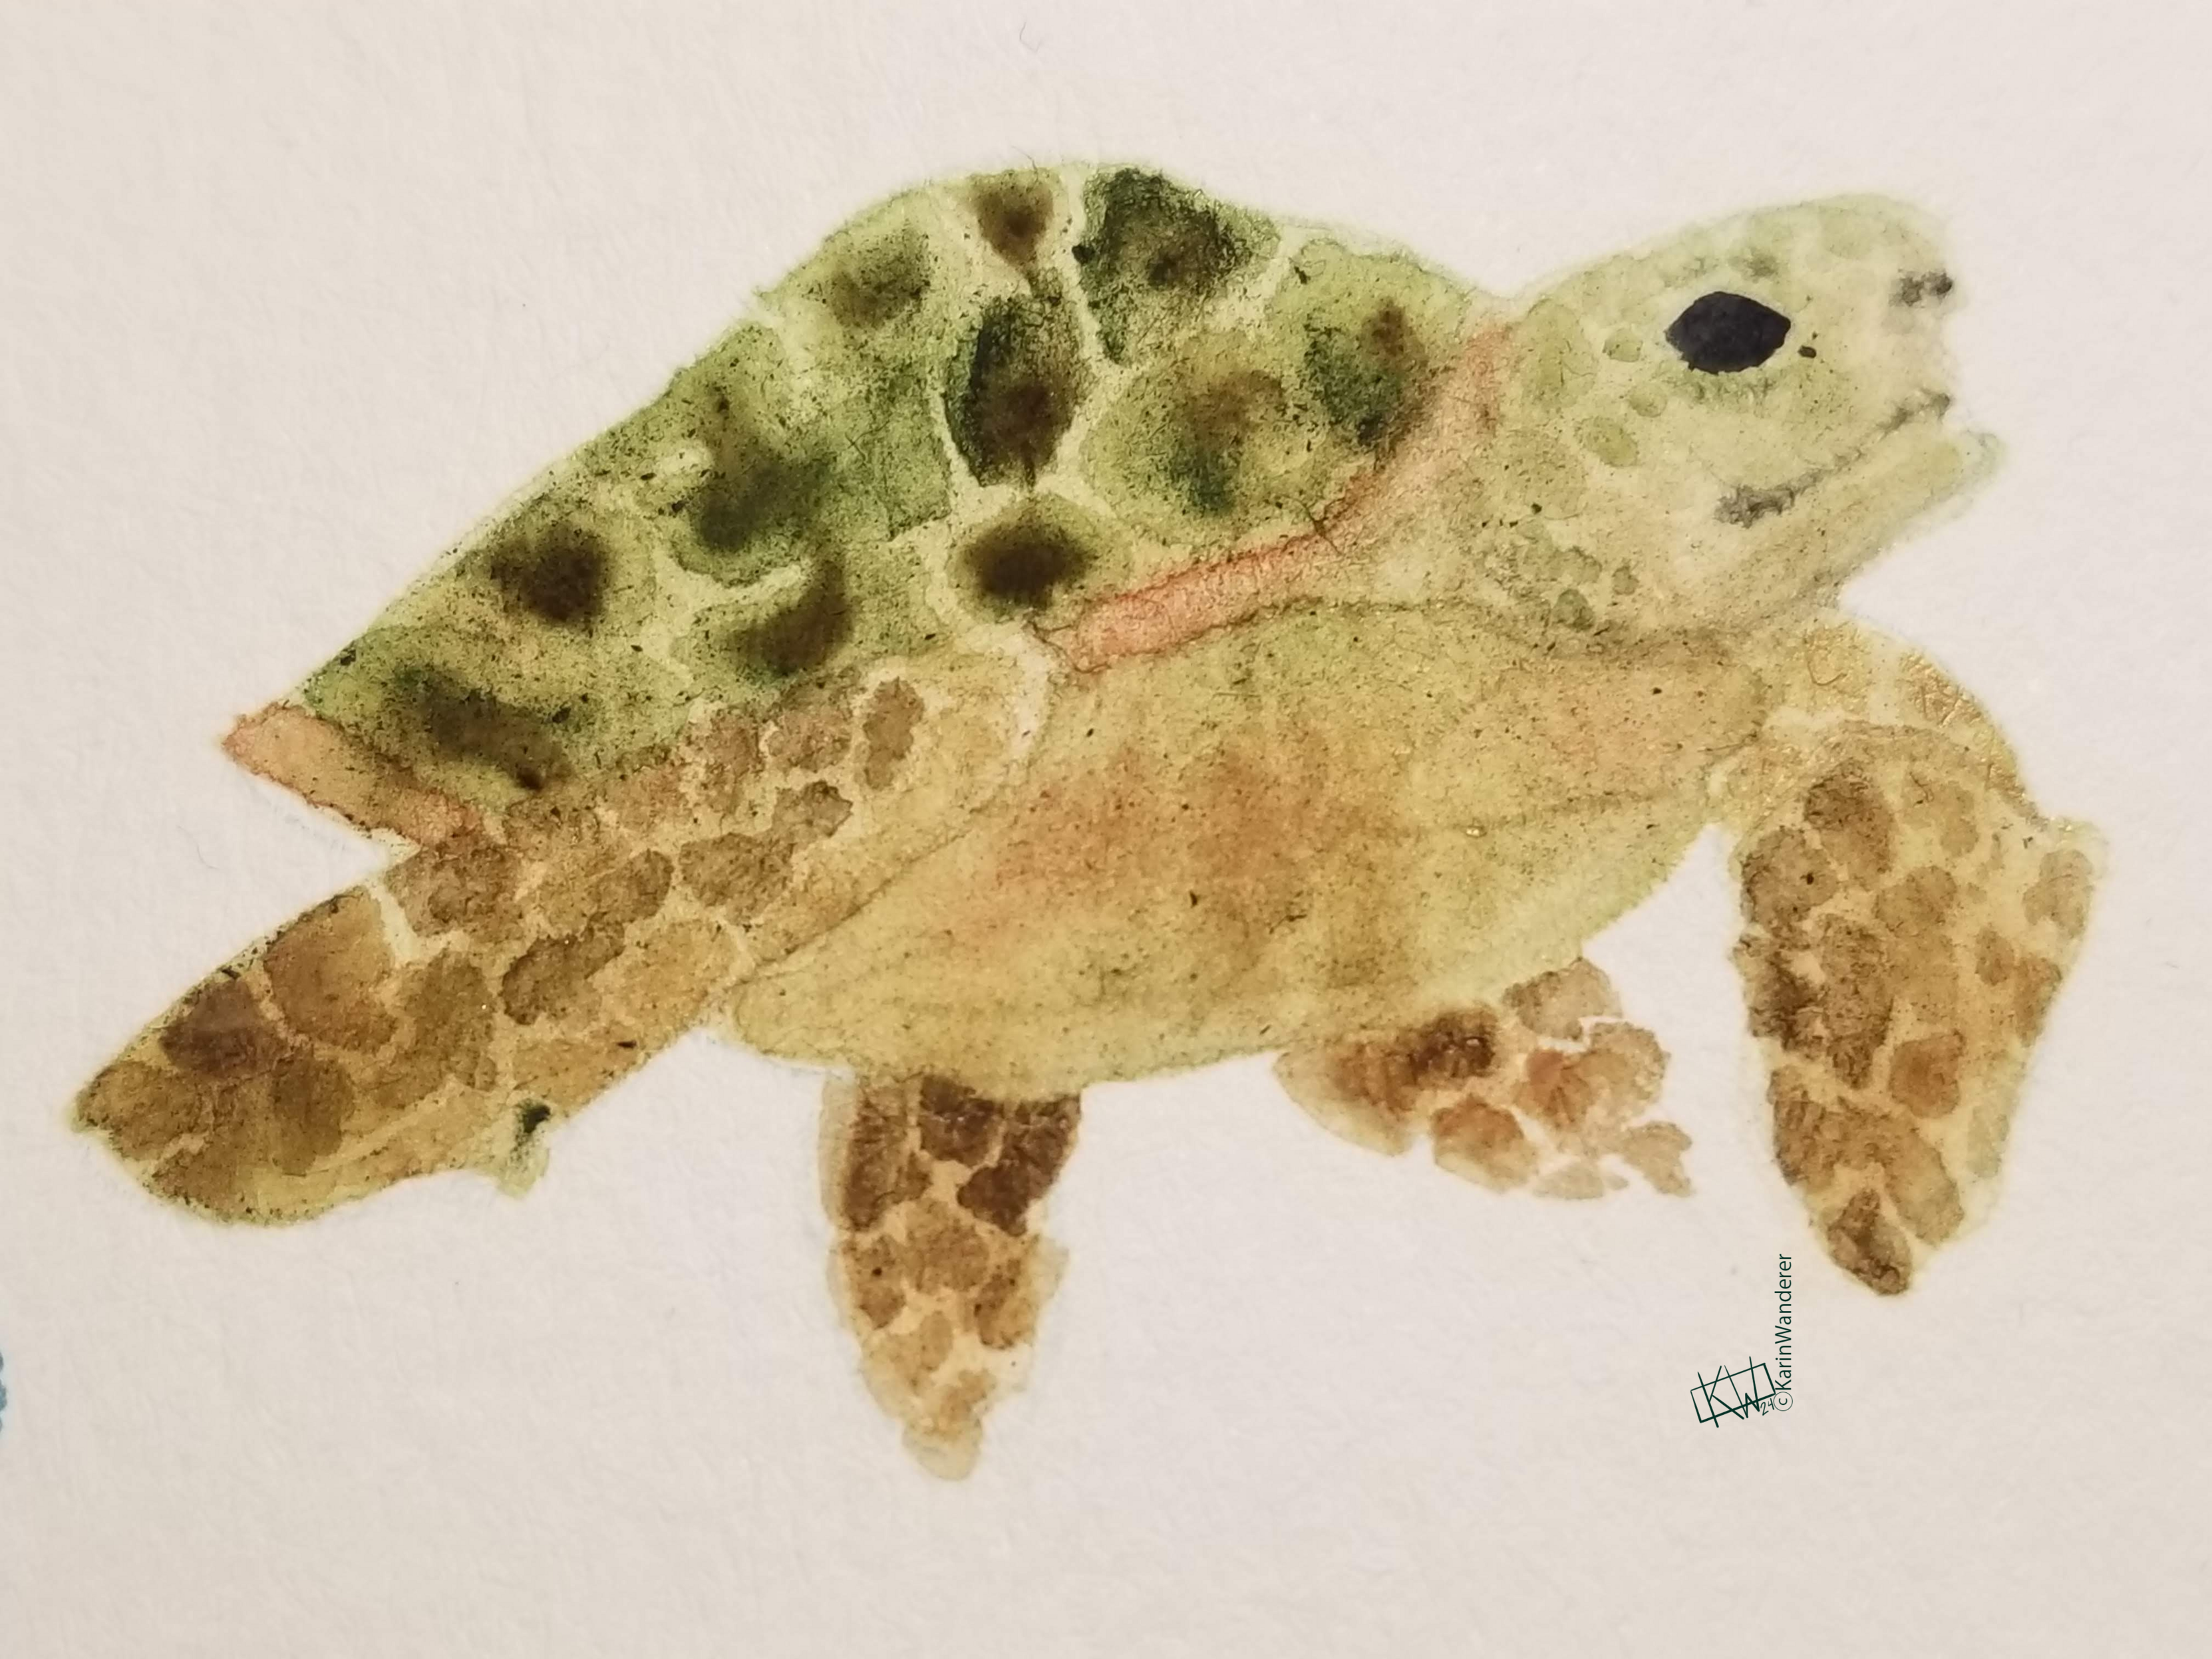 Watercolor sea turtle with green shell, brown carapace, & greenish brown body swimming happily.